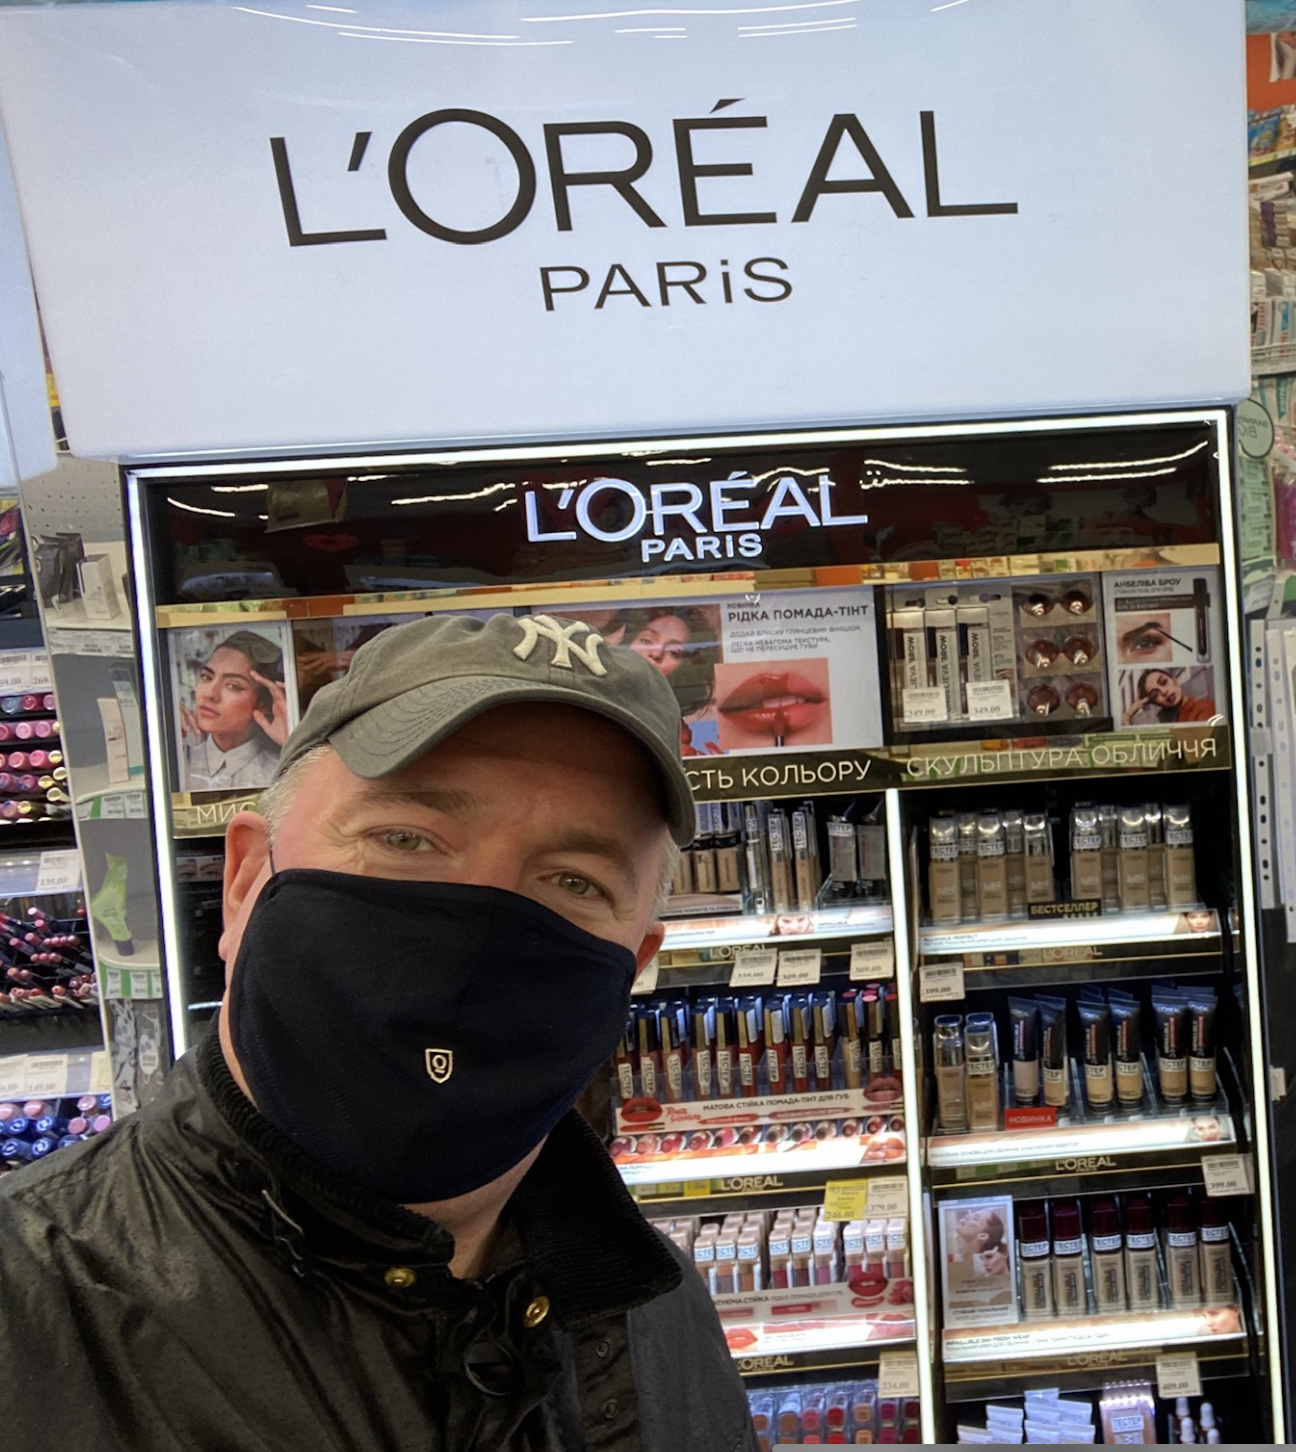 Mark Sawchuk stands in front of a store display of L'Oreal makeup products while wearing a face mask